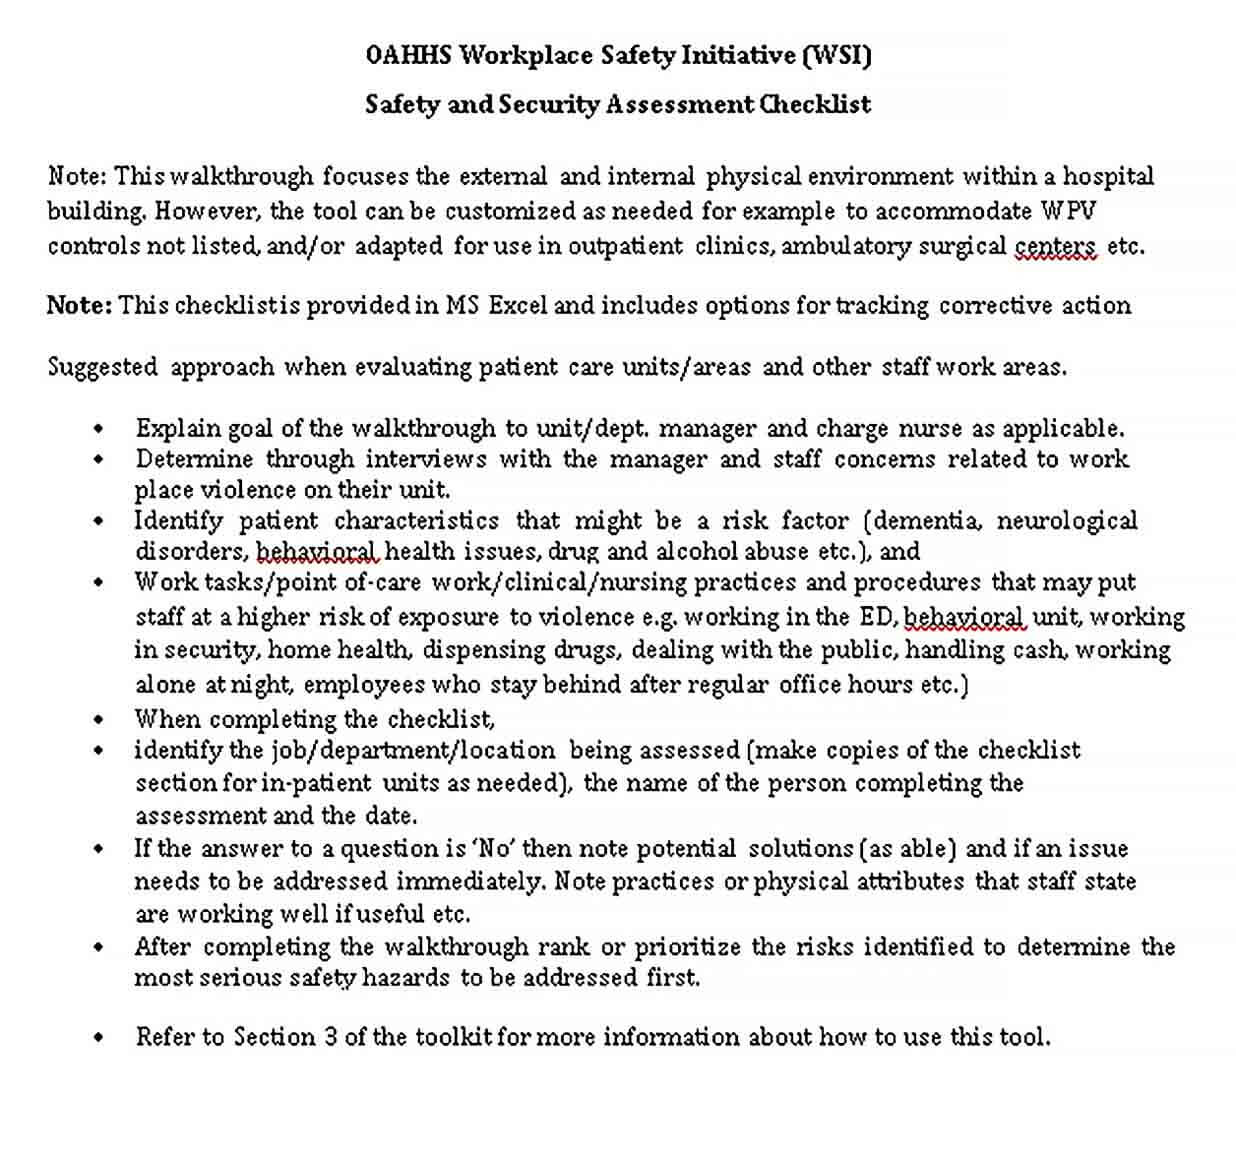 Sample Safety and Security Assessment Checklist